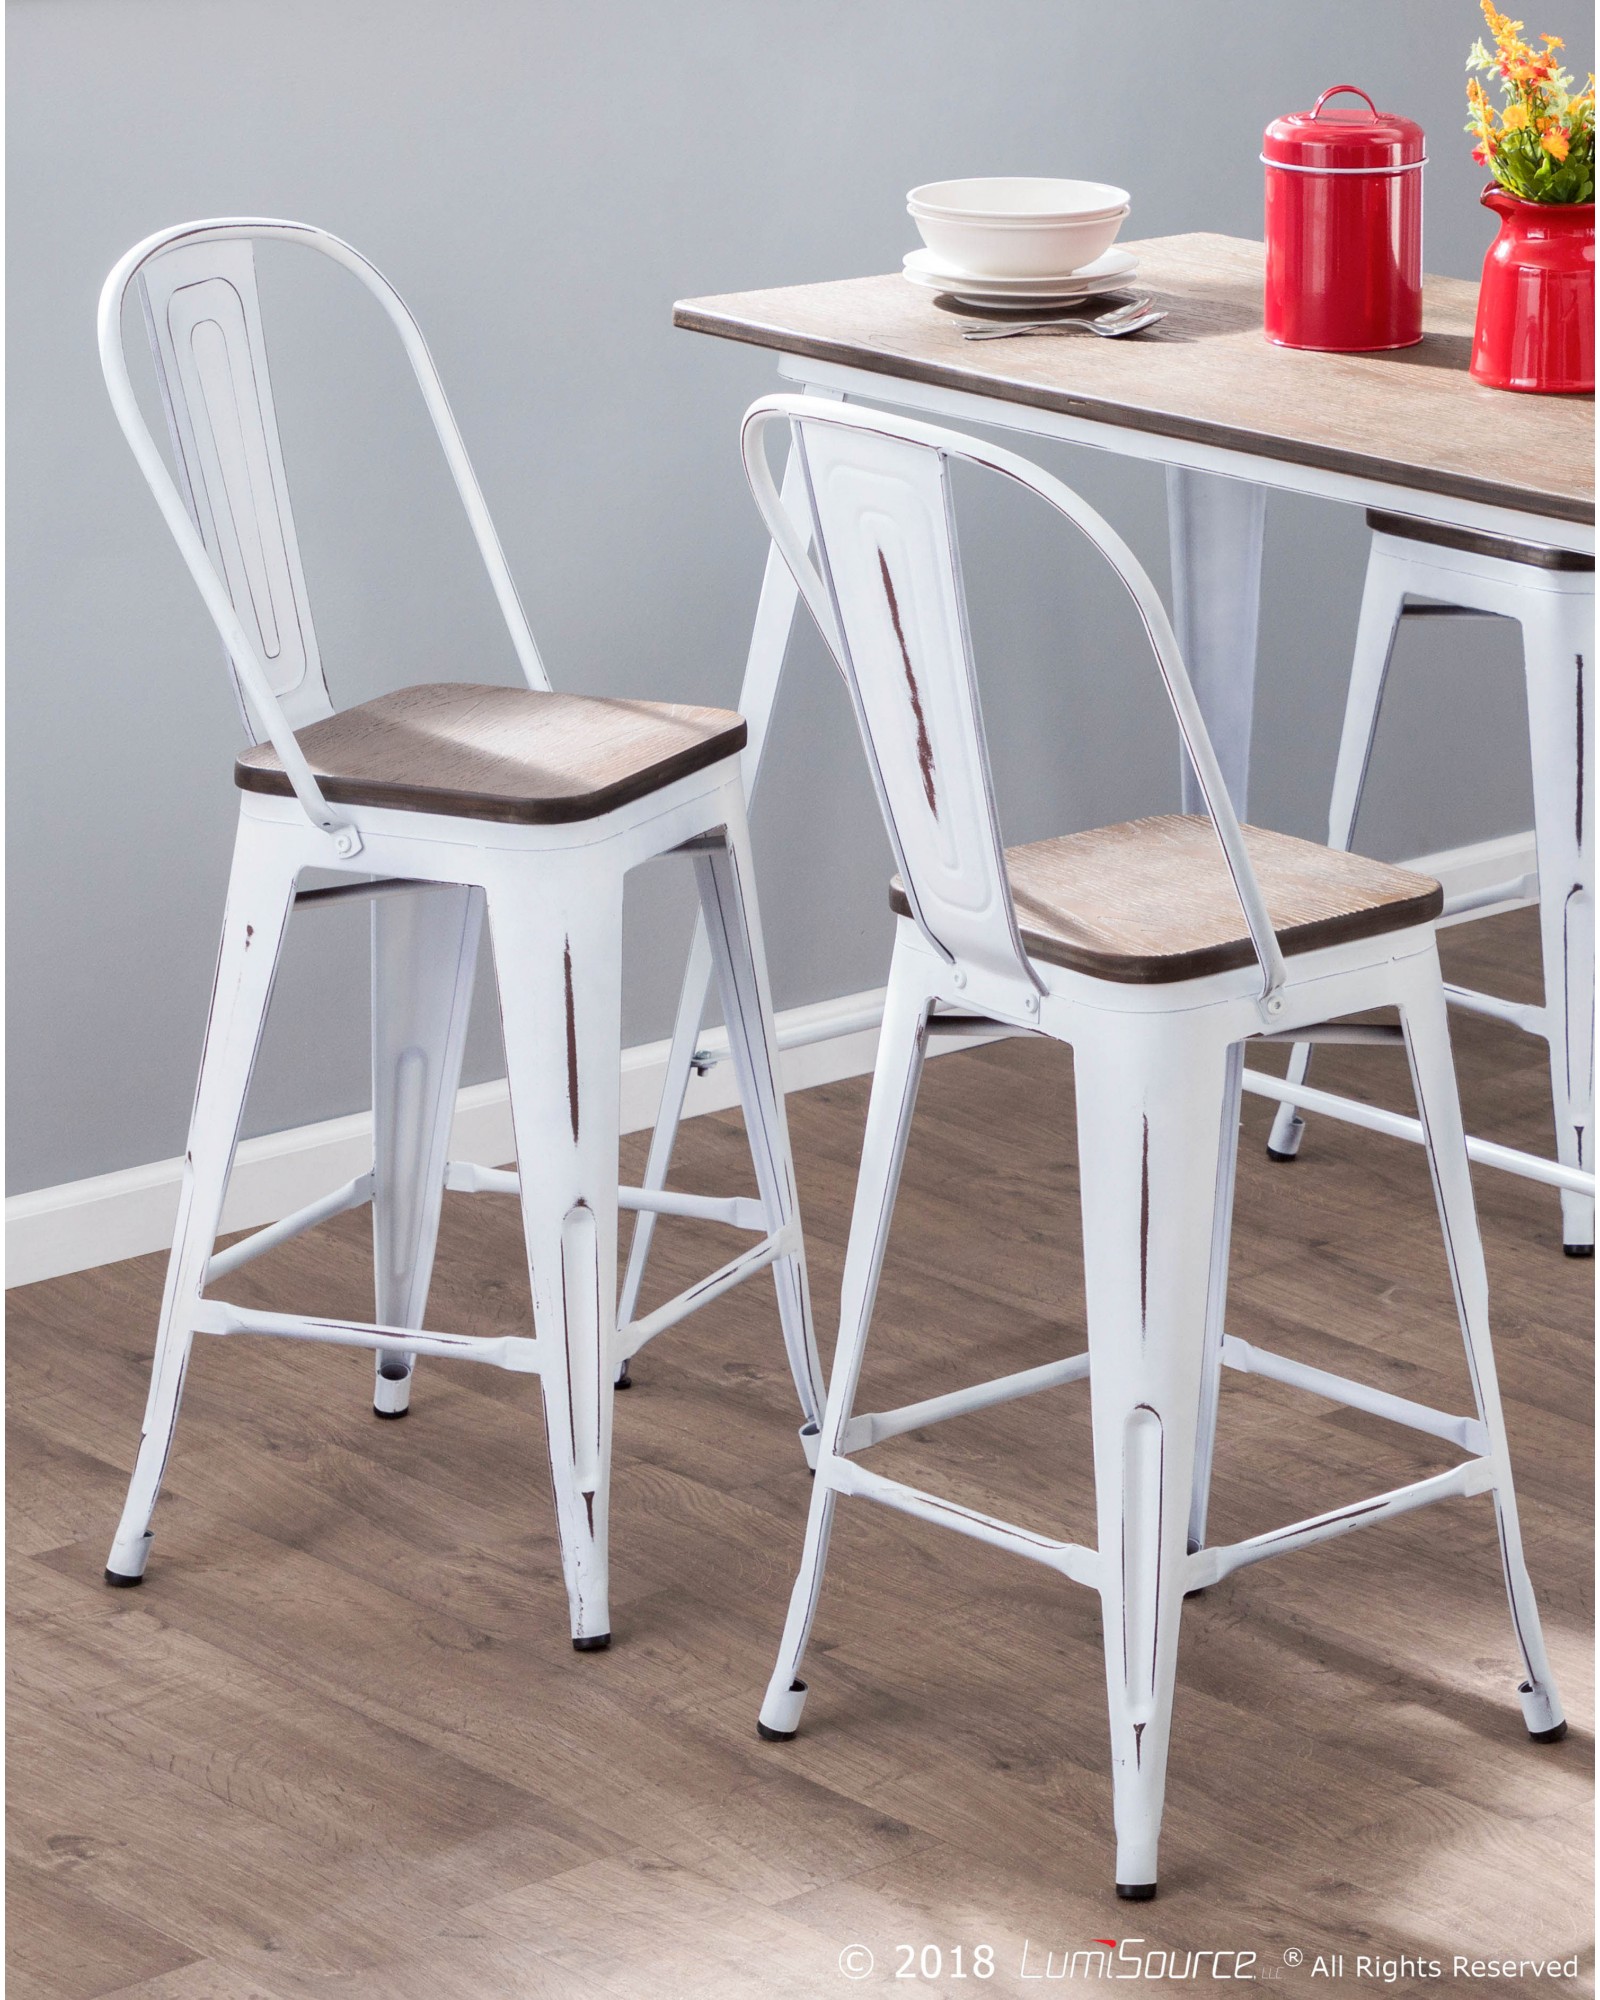 Oregon Industrial High Back Counter Stool in Vintage White and Espresso - Set of 2